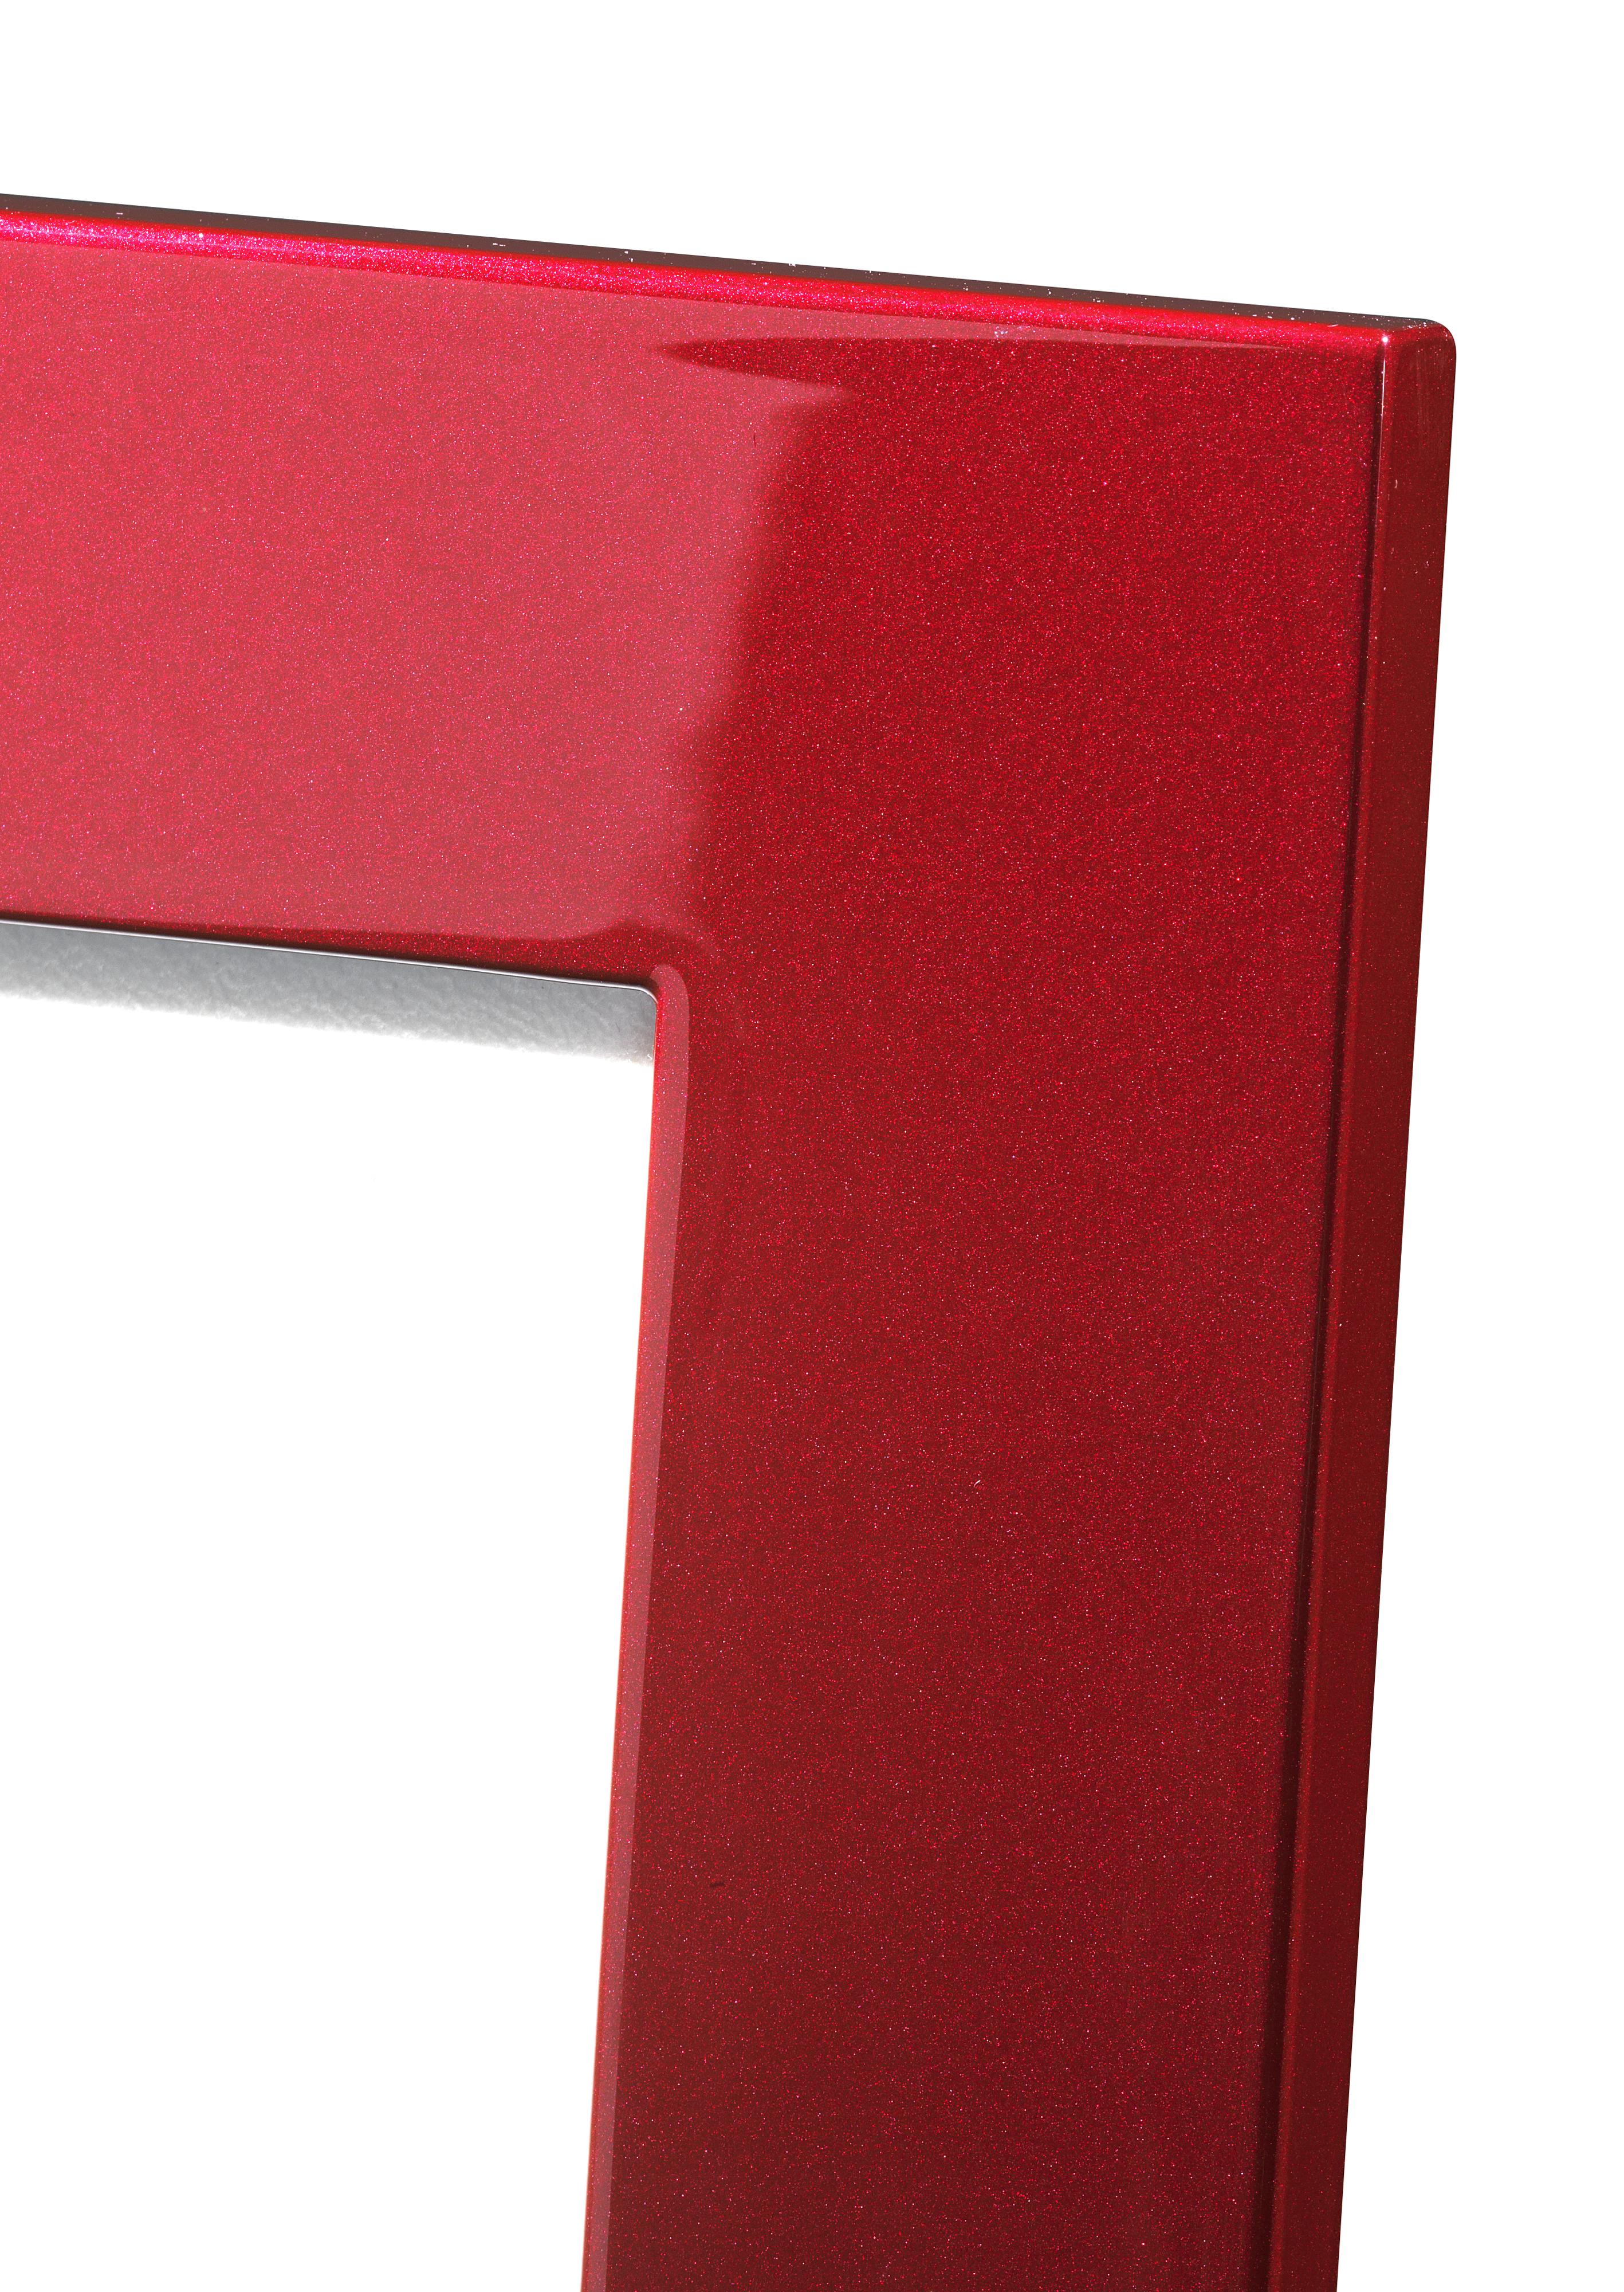 Other Firenze Ruby Photoframe For Sale